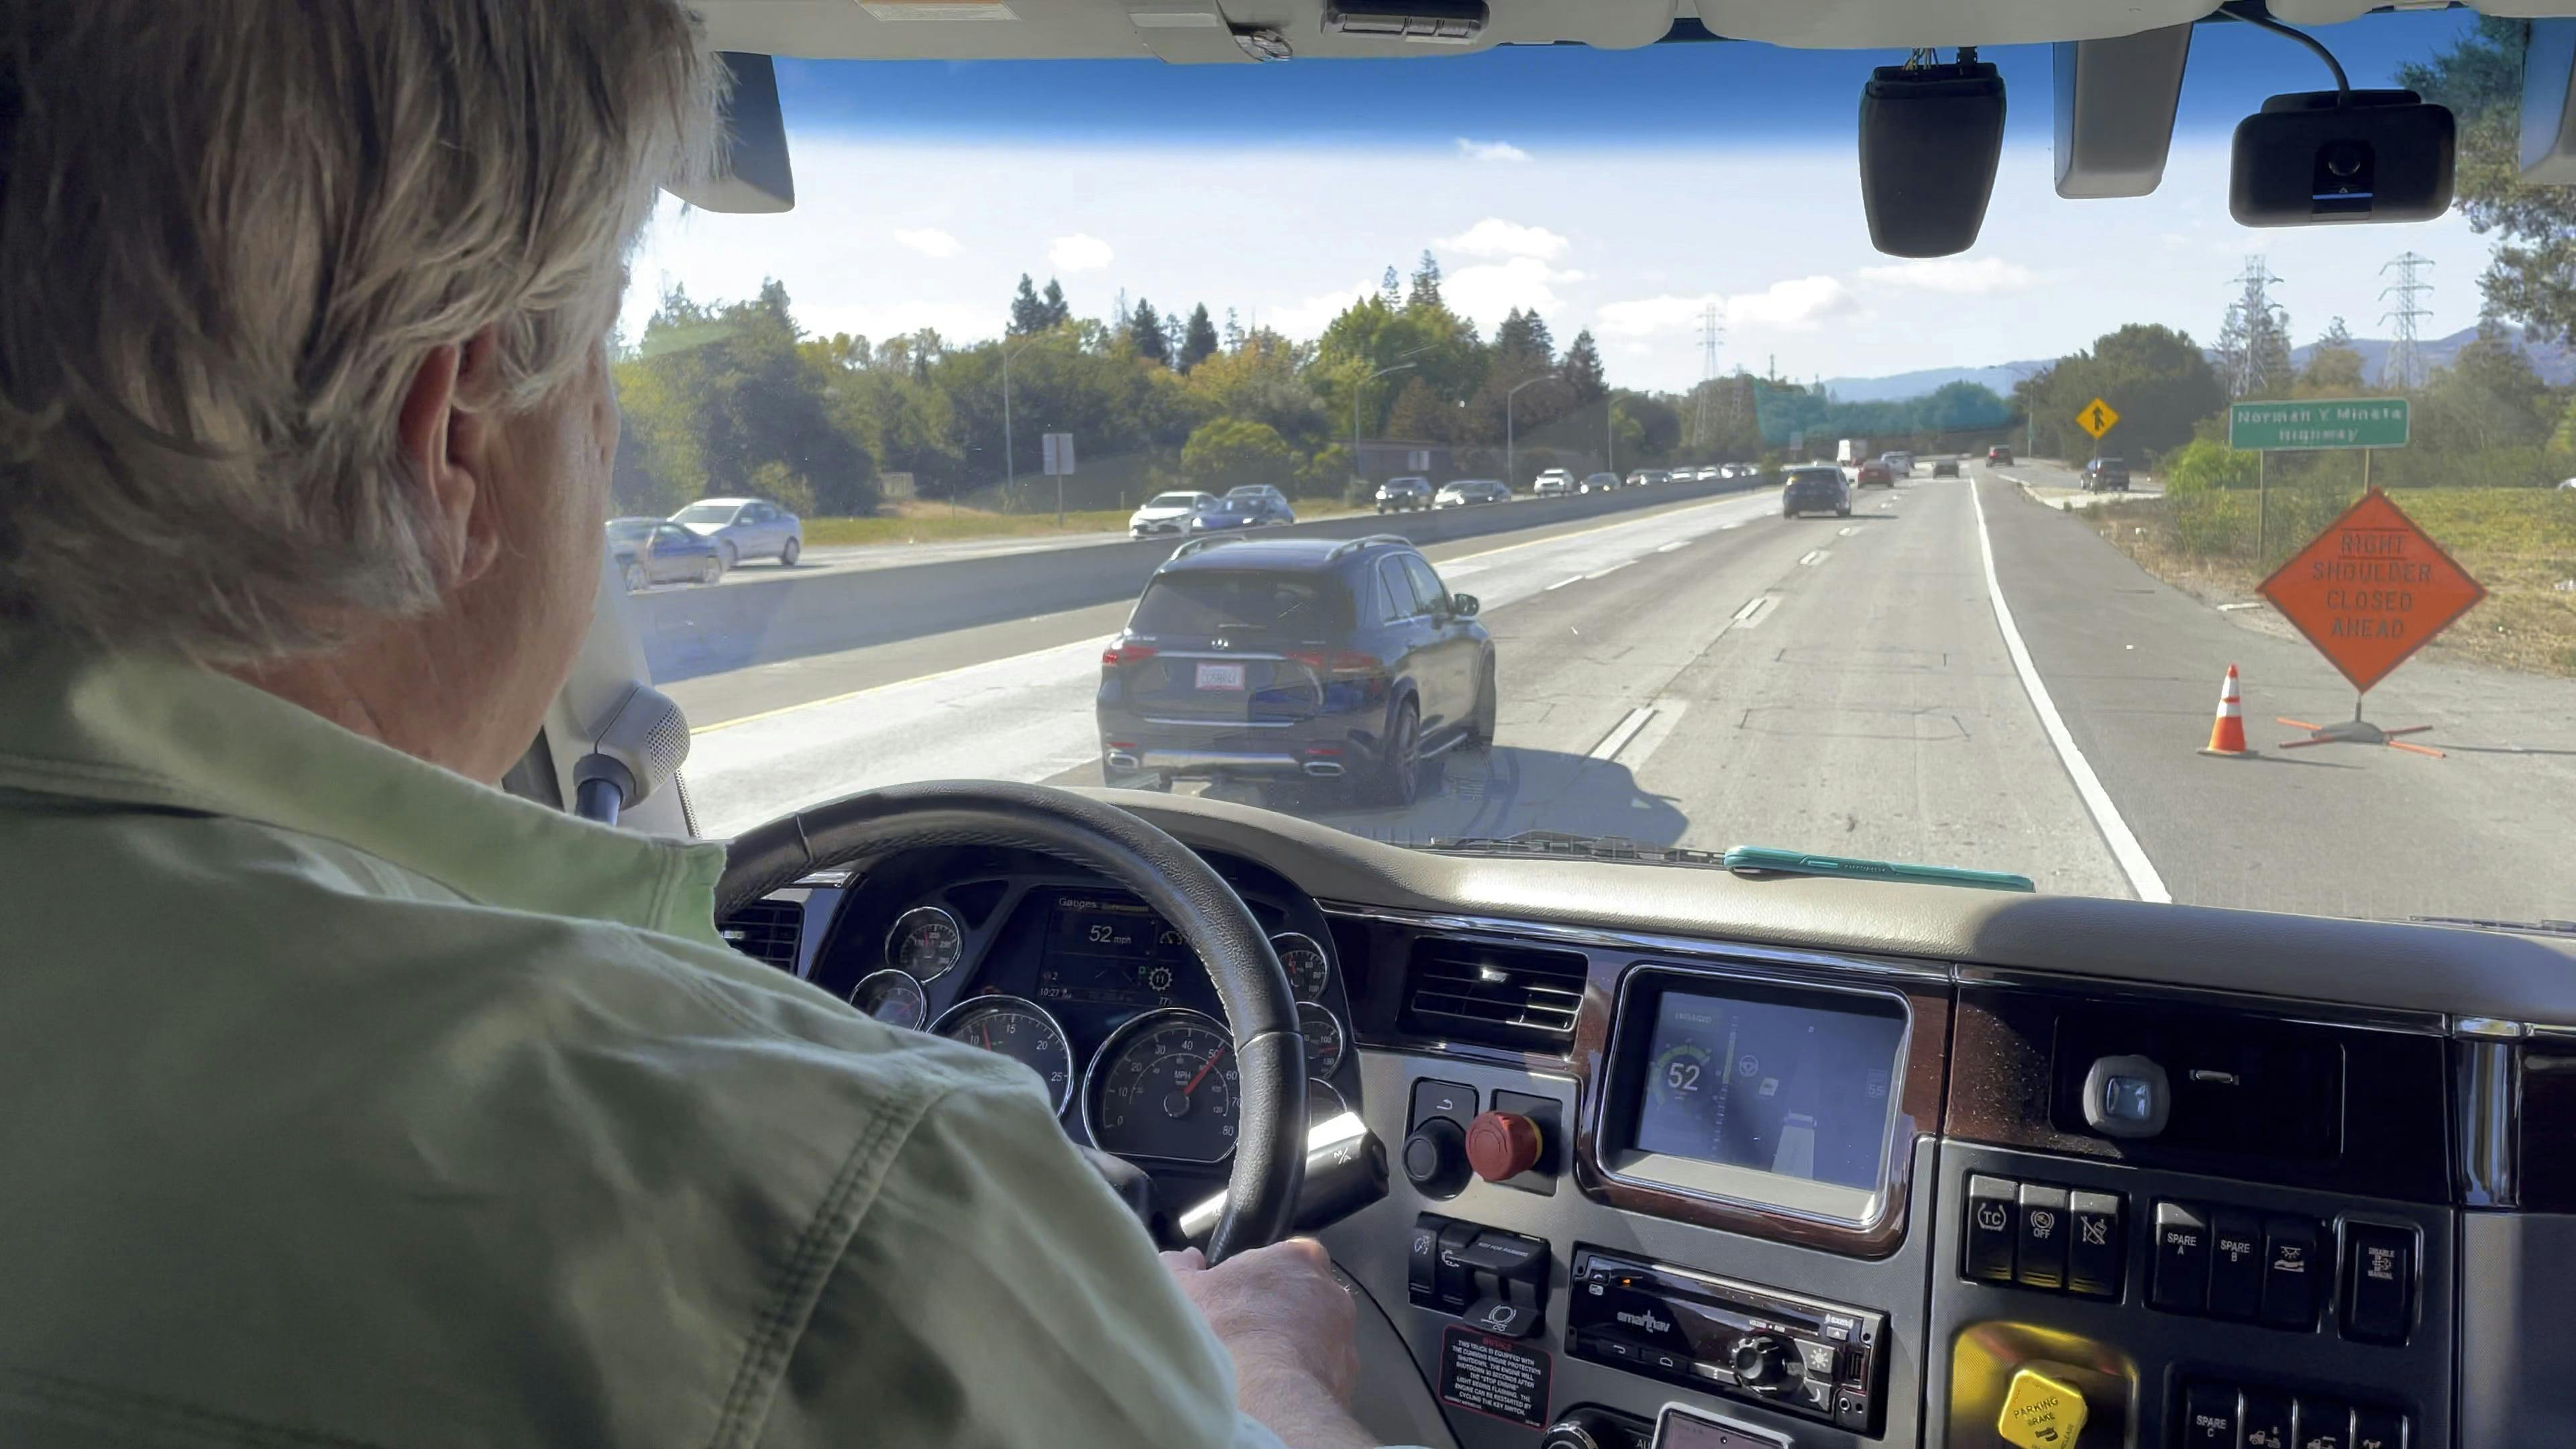 Jack Roberts test drives PlusDrive-powered highly automated truck in Santa Clara